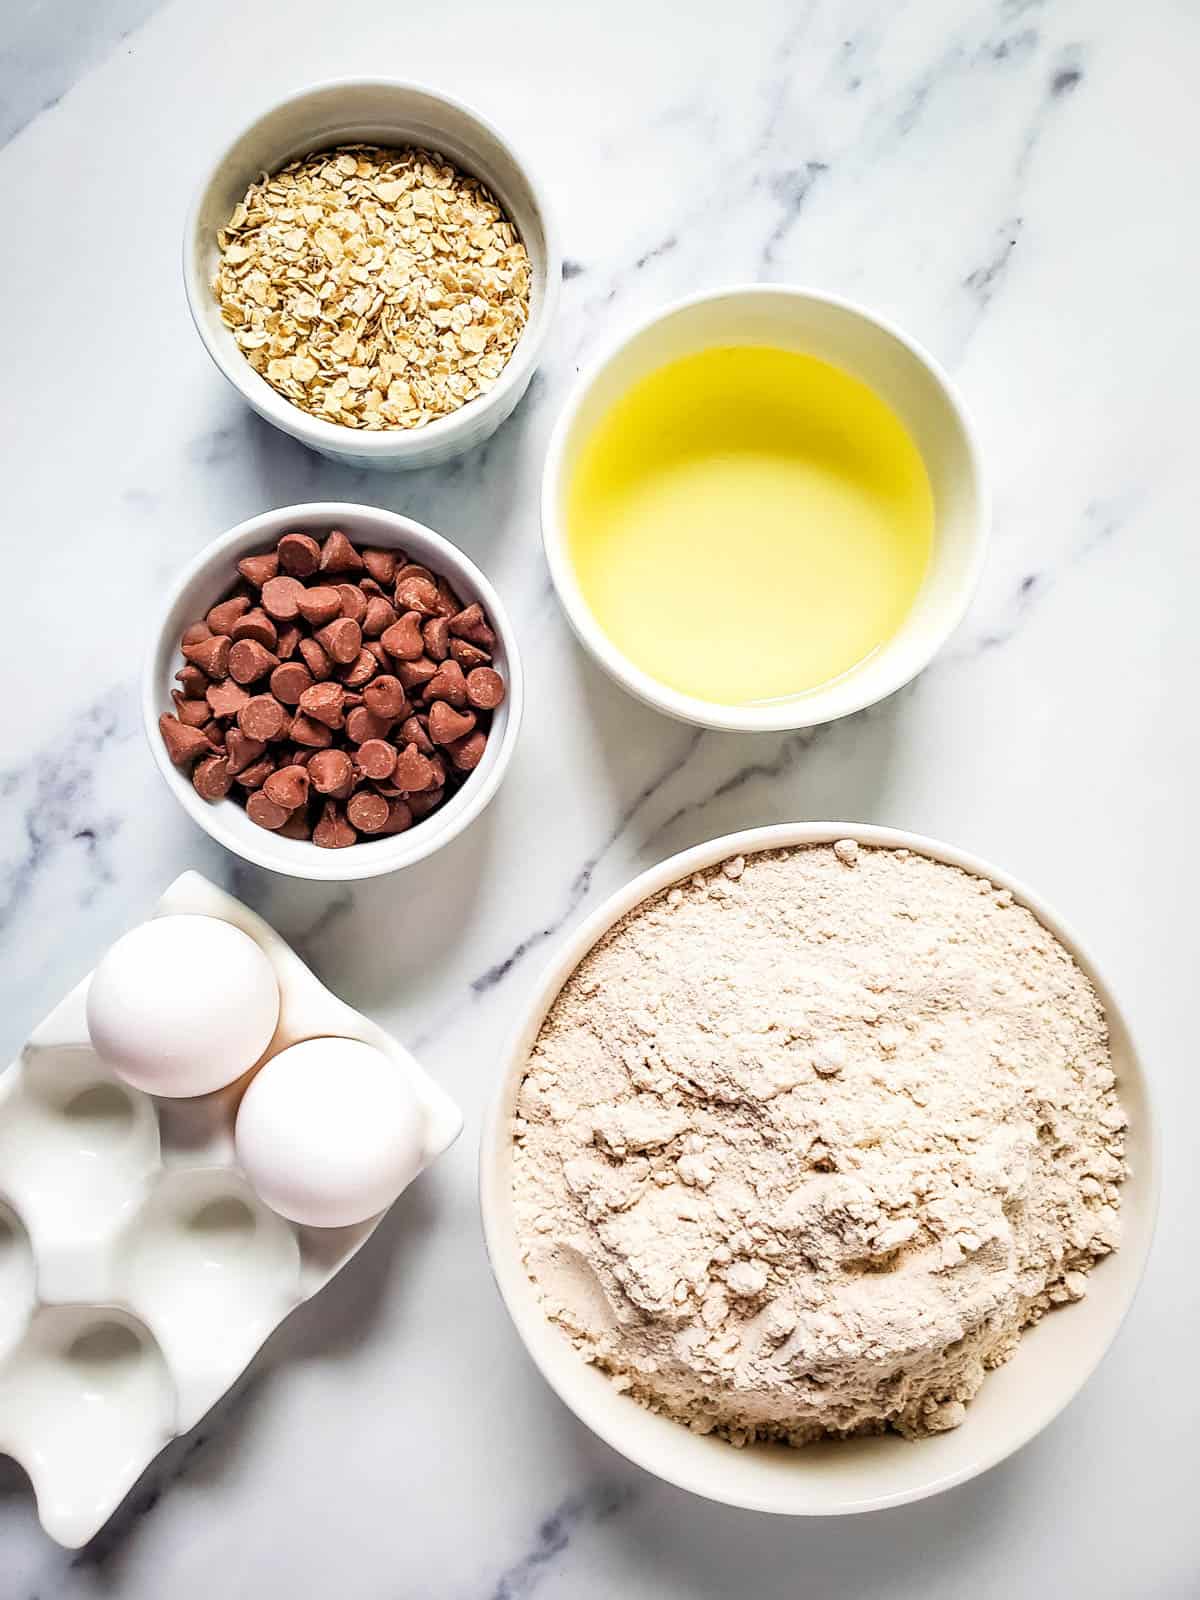 The ingredients to make Oatmeal Cake Mix Cookies with chocolate chips in small bowls on a table.